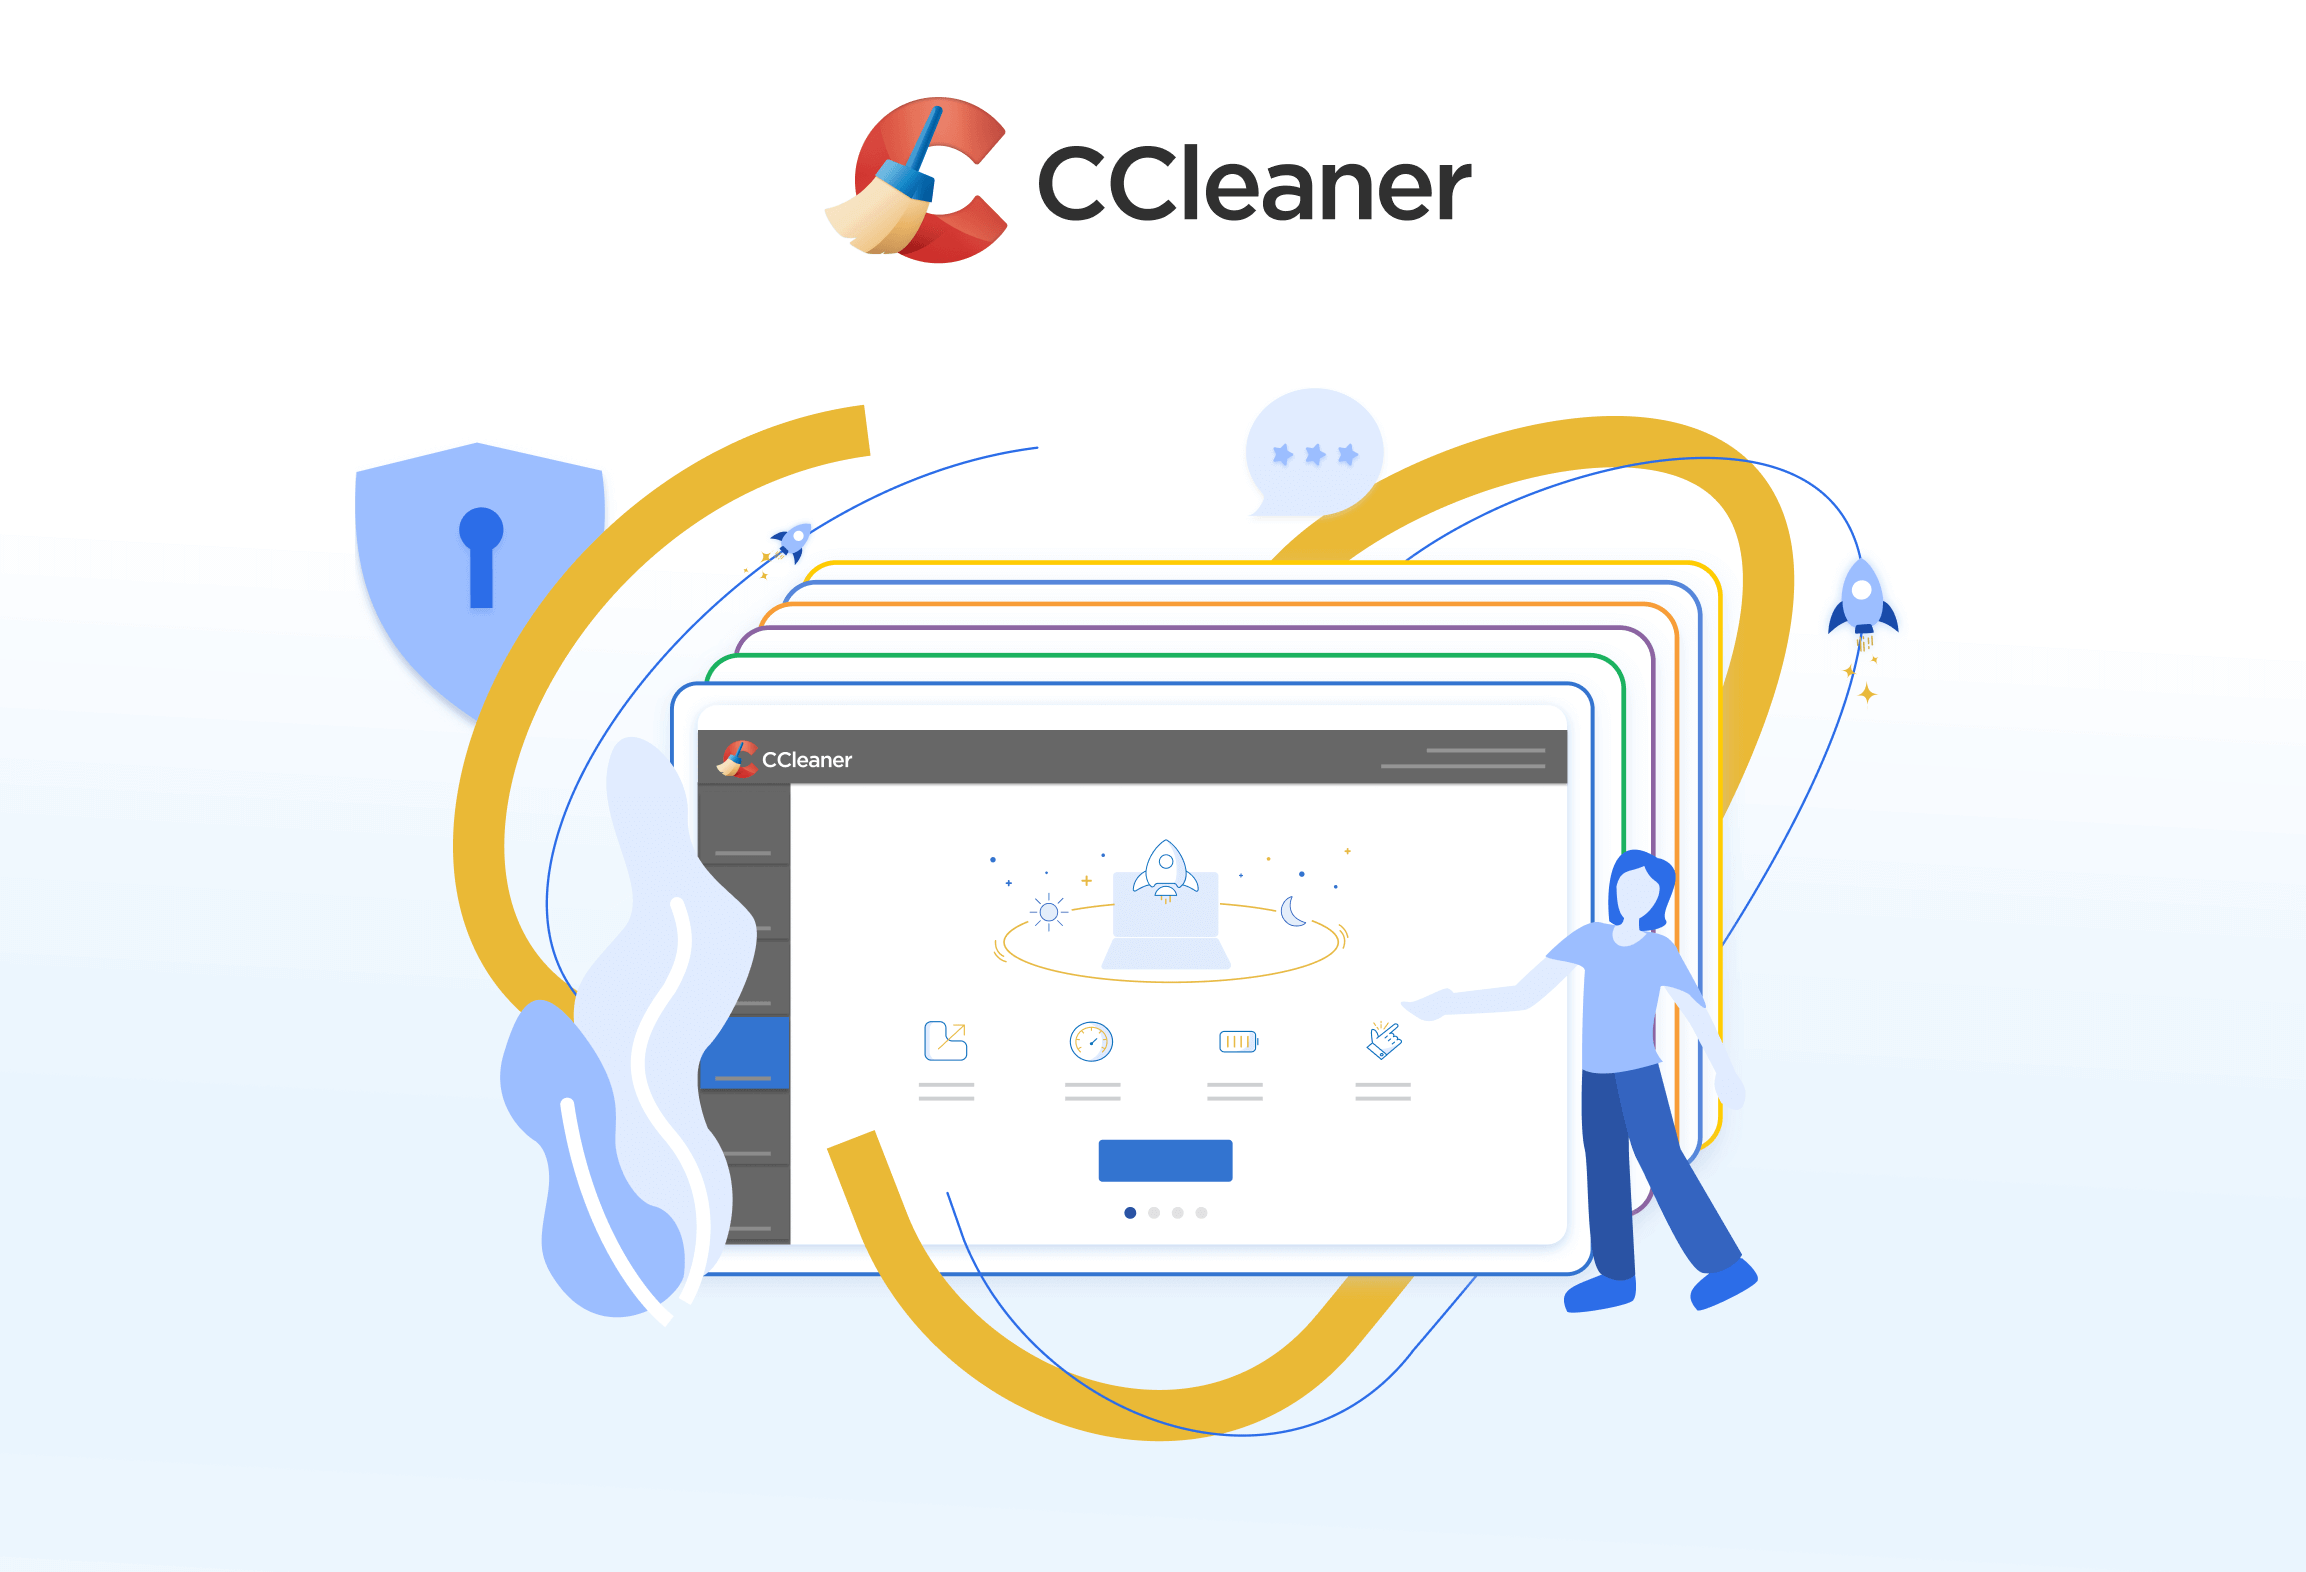 Pick up CCleaner Professional for only $1 for a full year